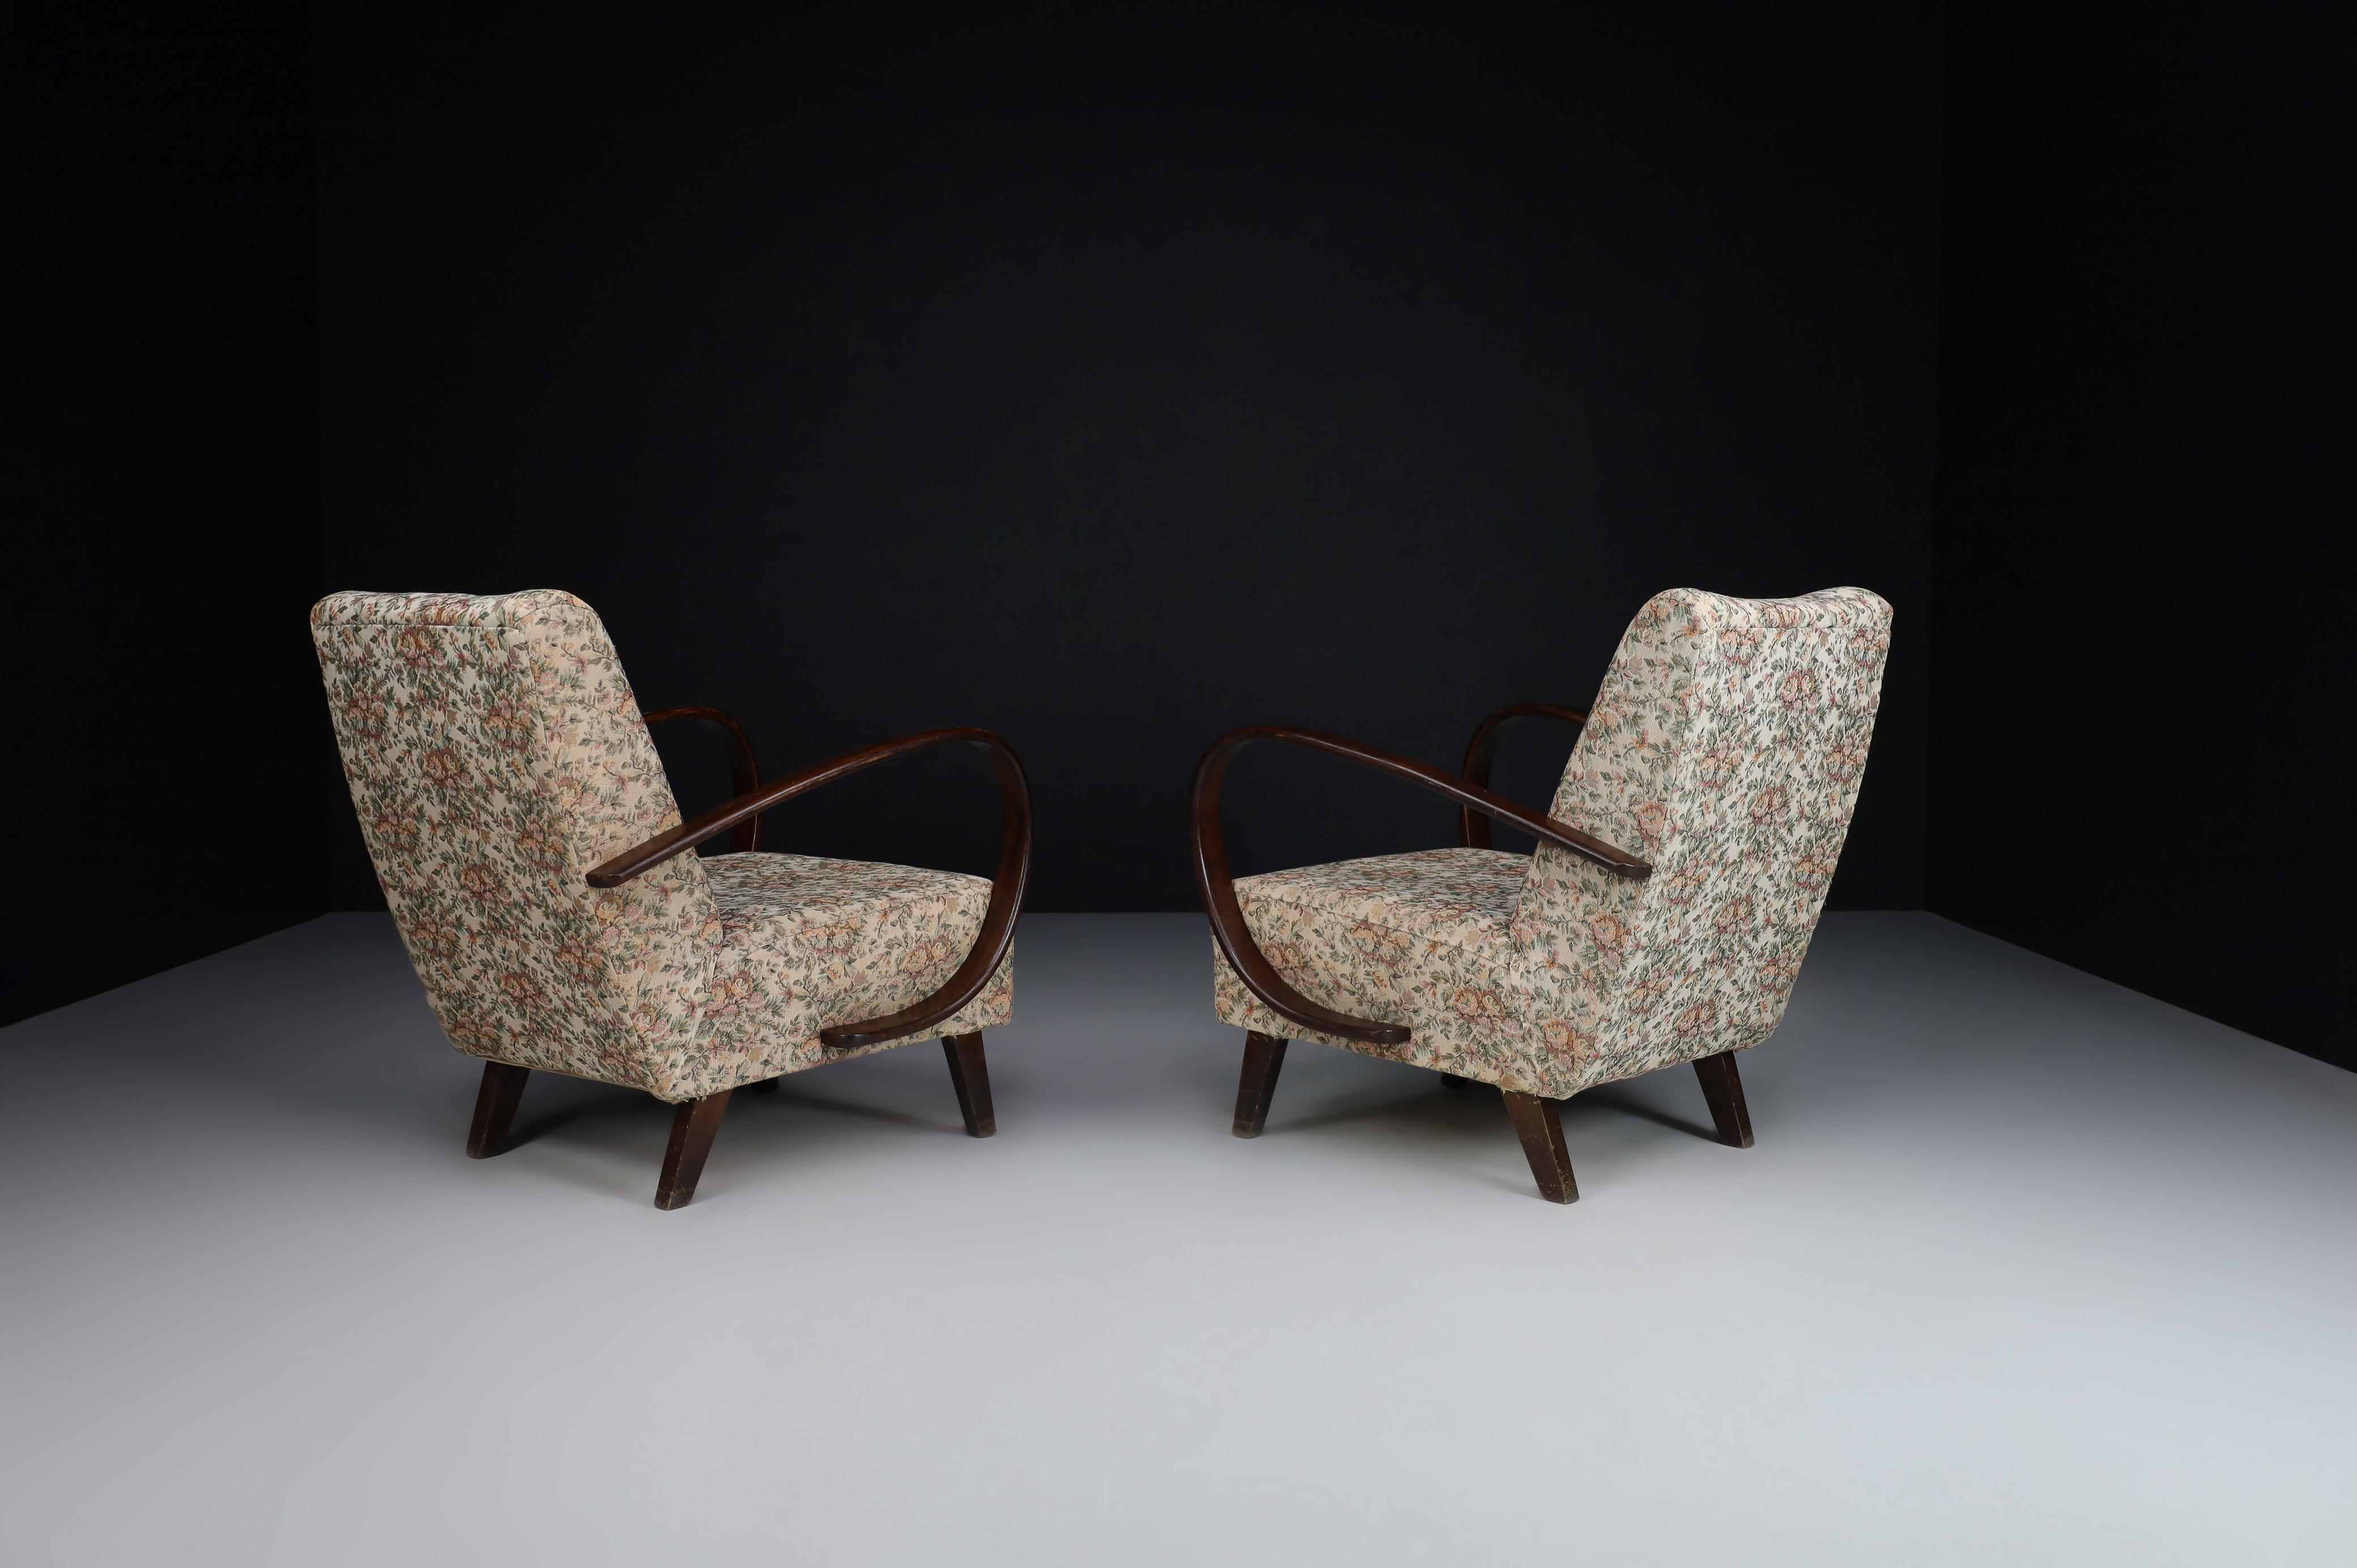 Fabric Jindrich Halabala Bentwood Armchairs with Original Floral Upholstery, 1940s